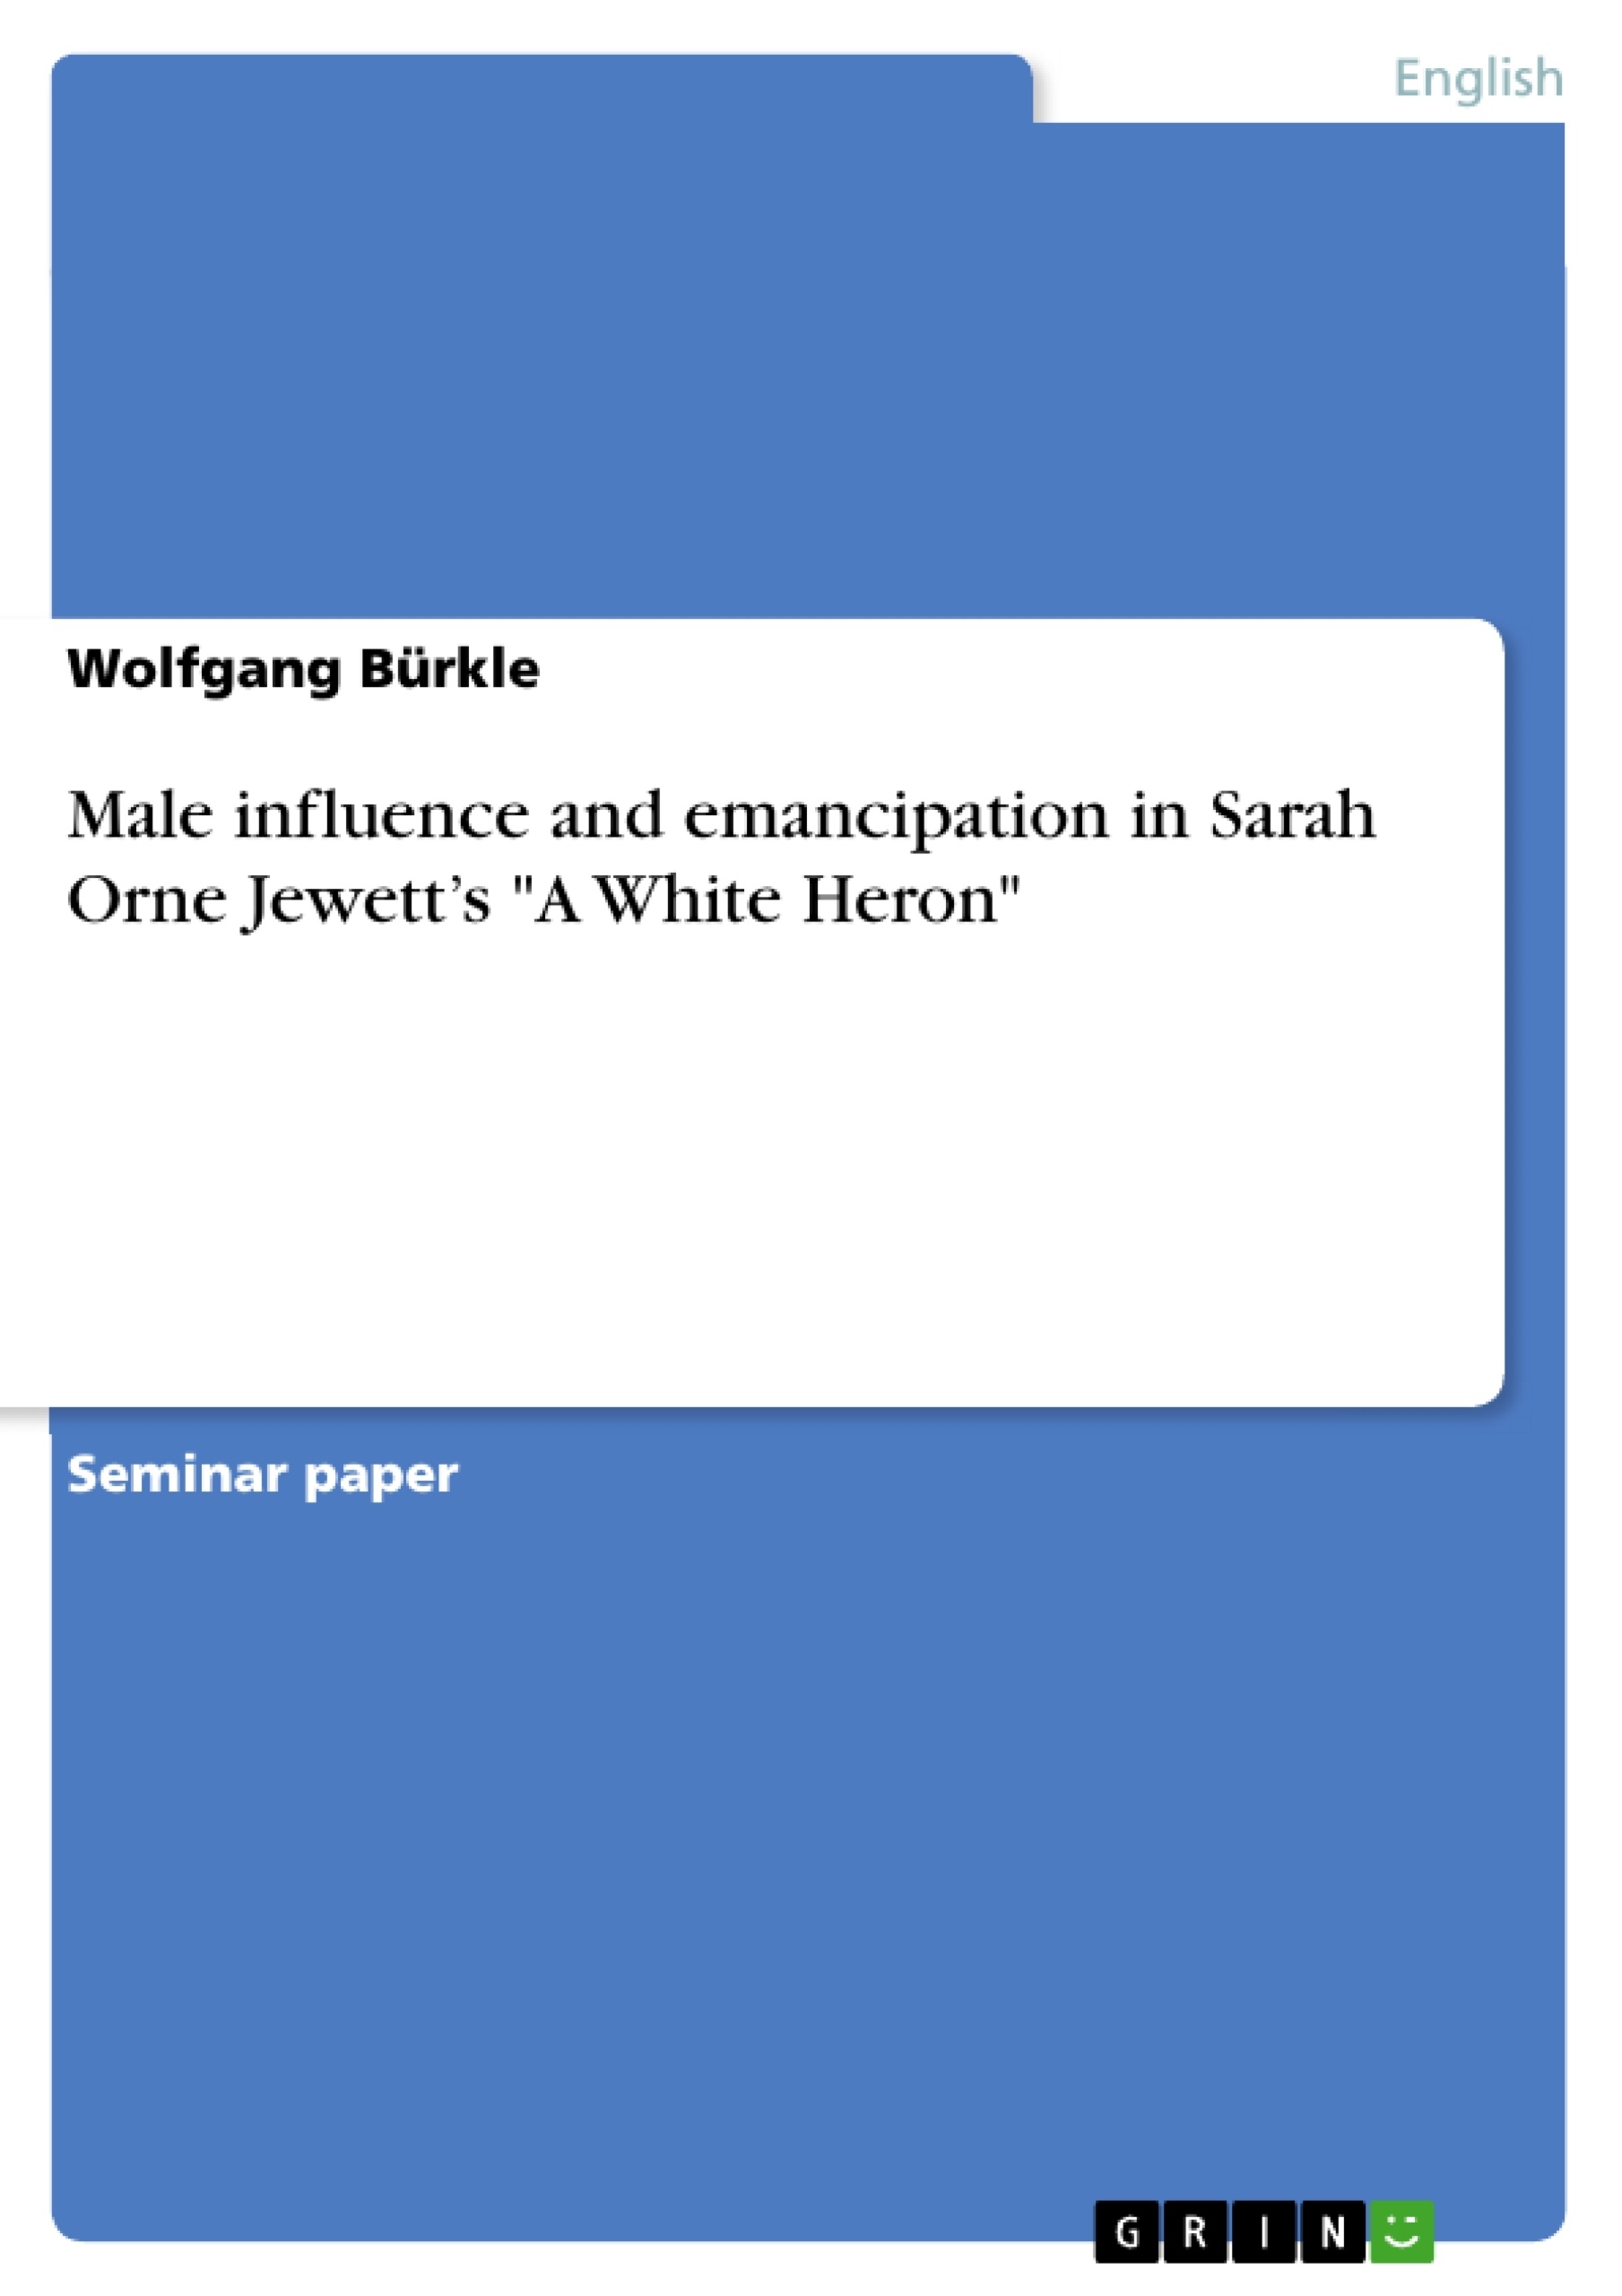 Titre: Male influence and emancipation in Sarah Orne Jewett’s "A White Heron"